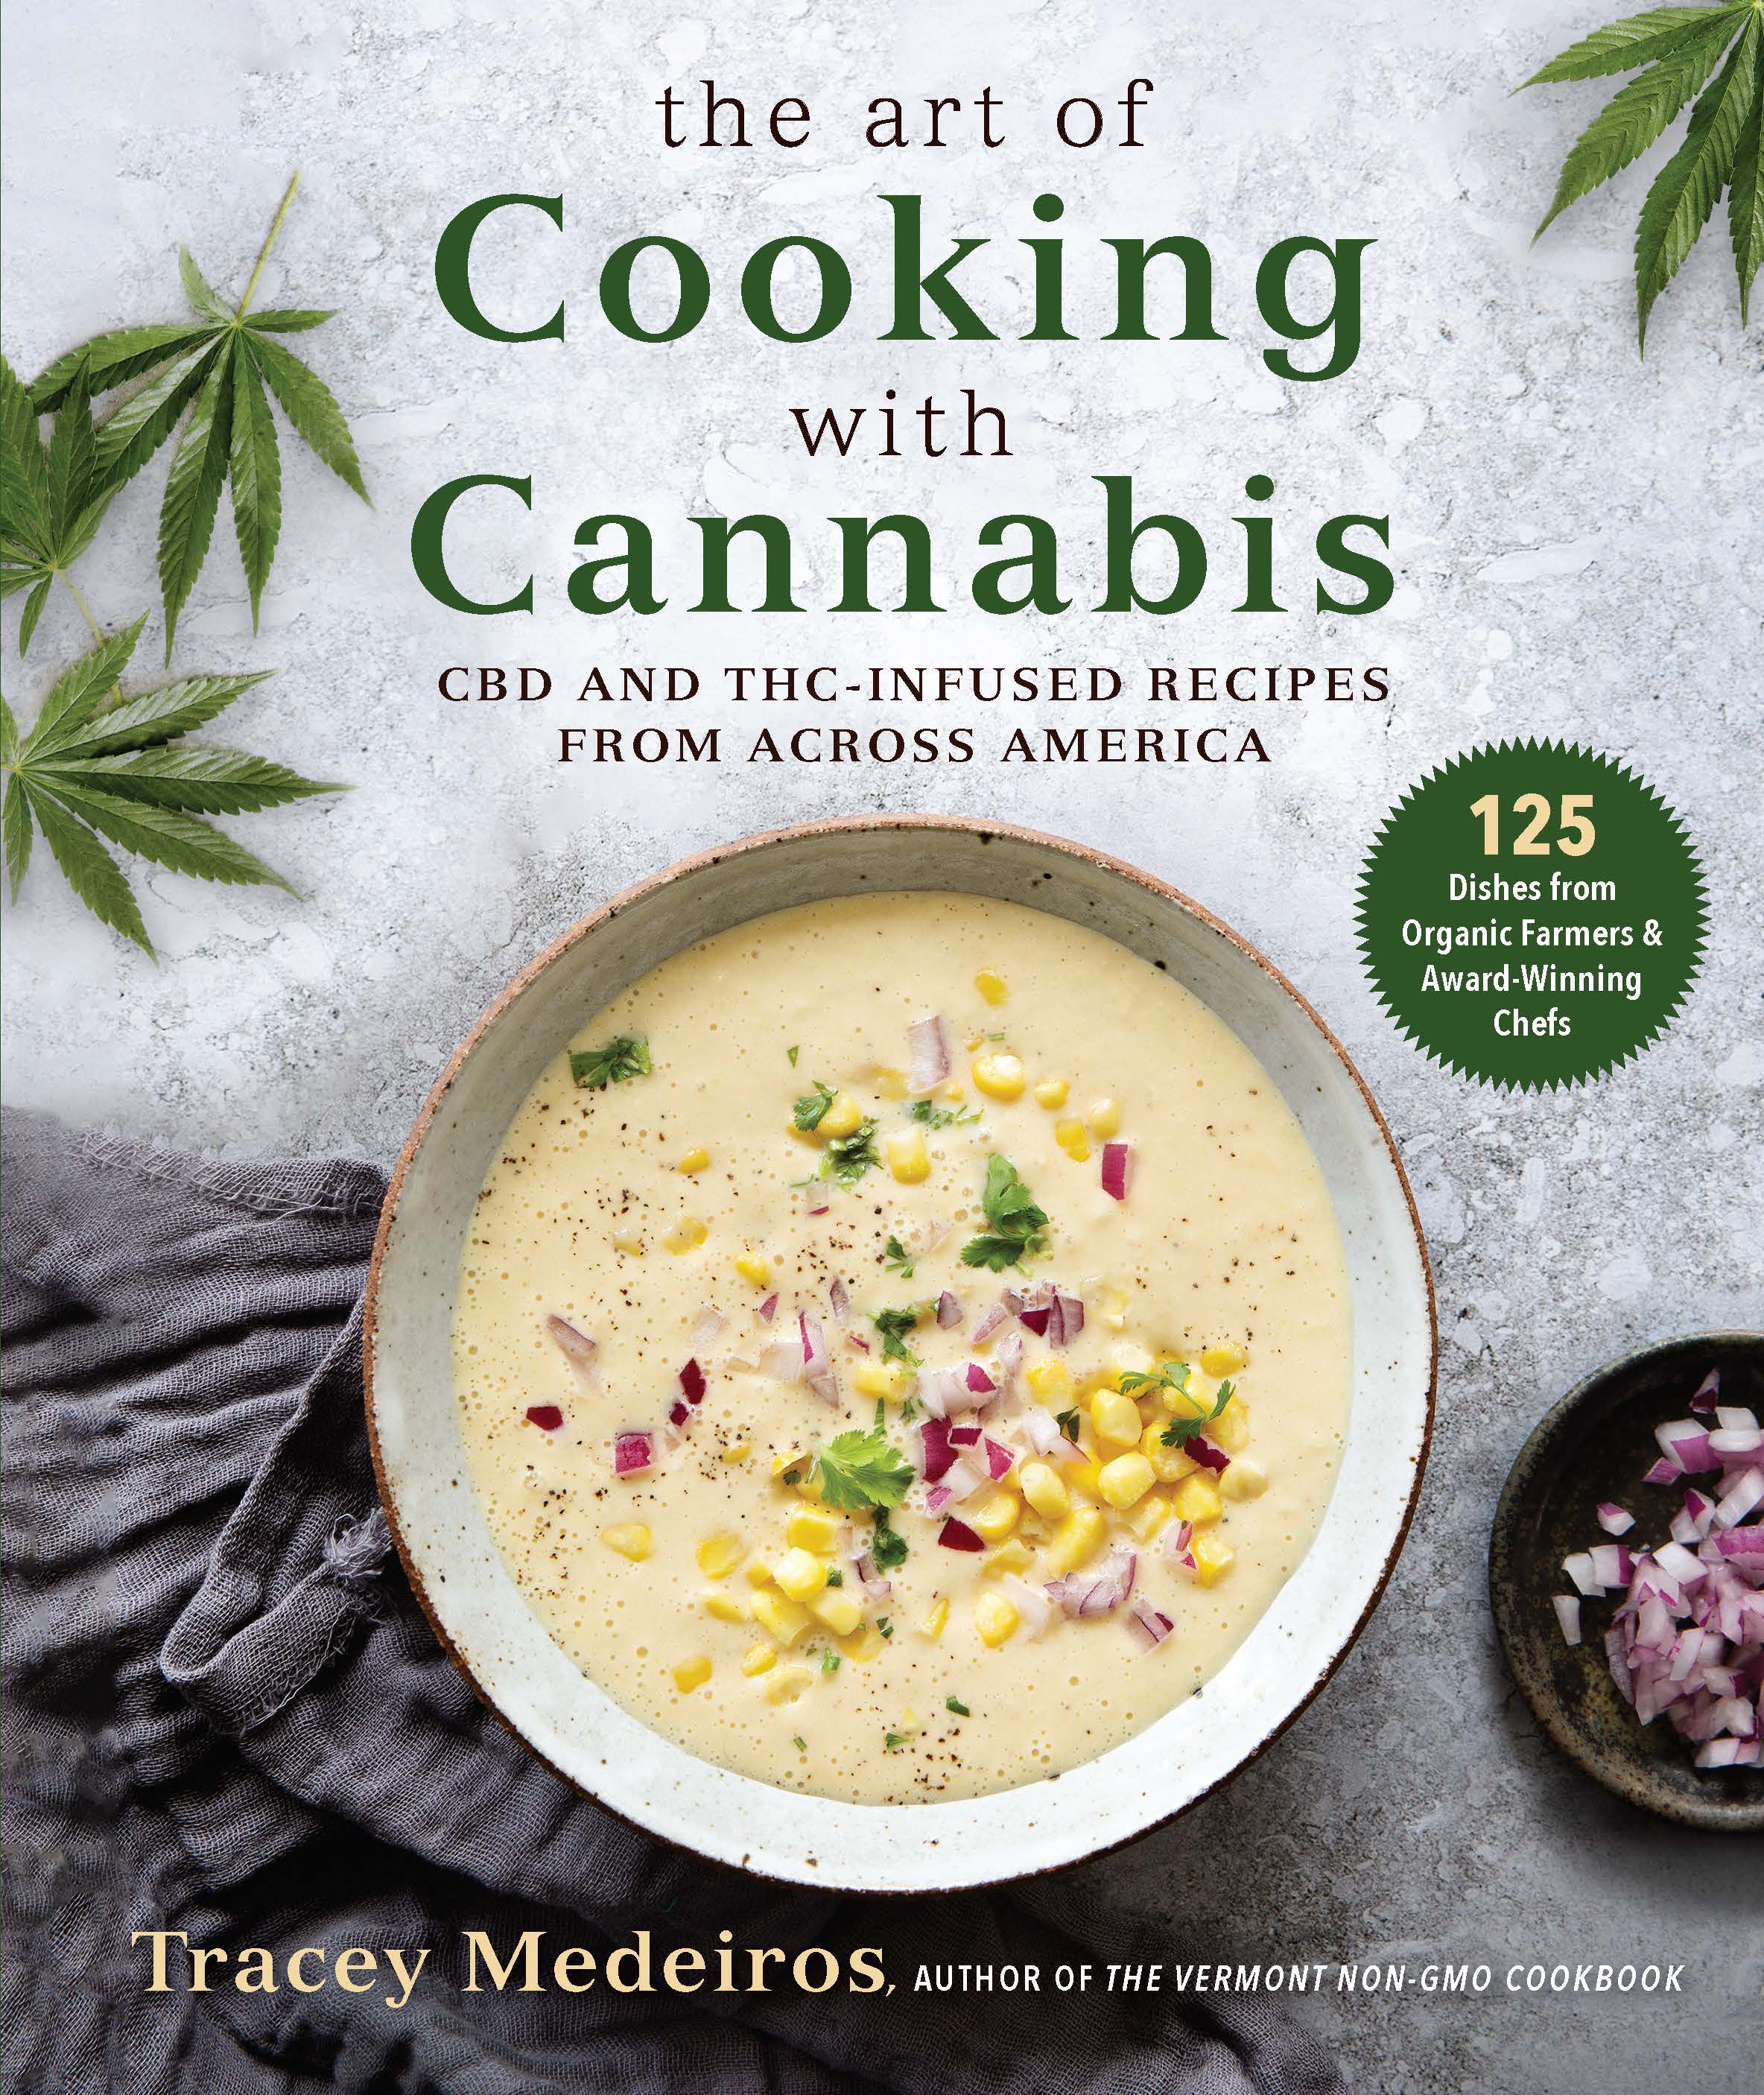 The cover of "The Art of Cooking with Cannabis." 